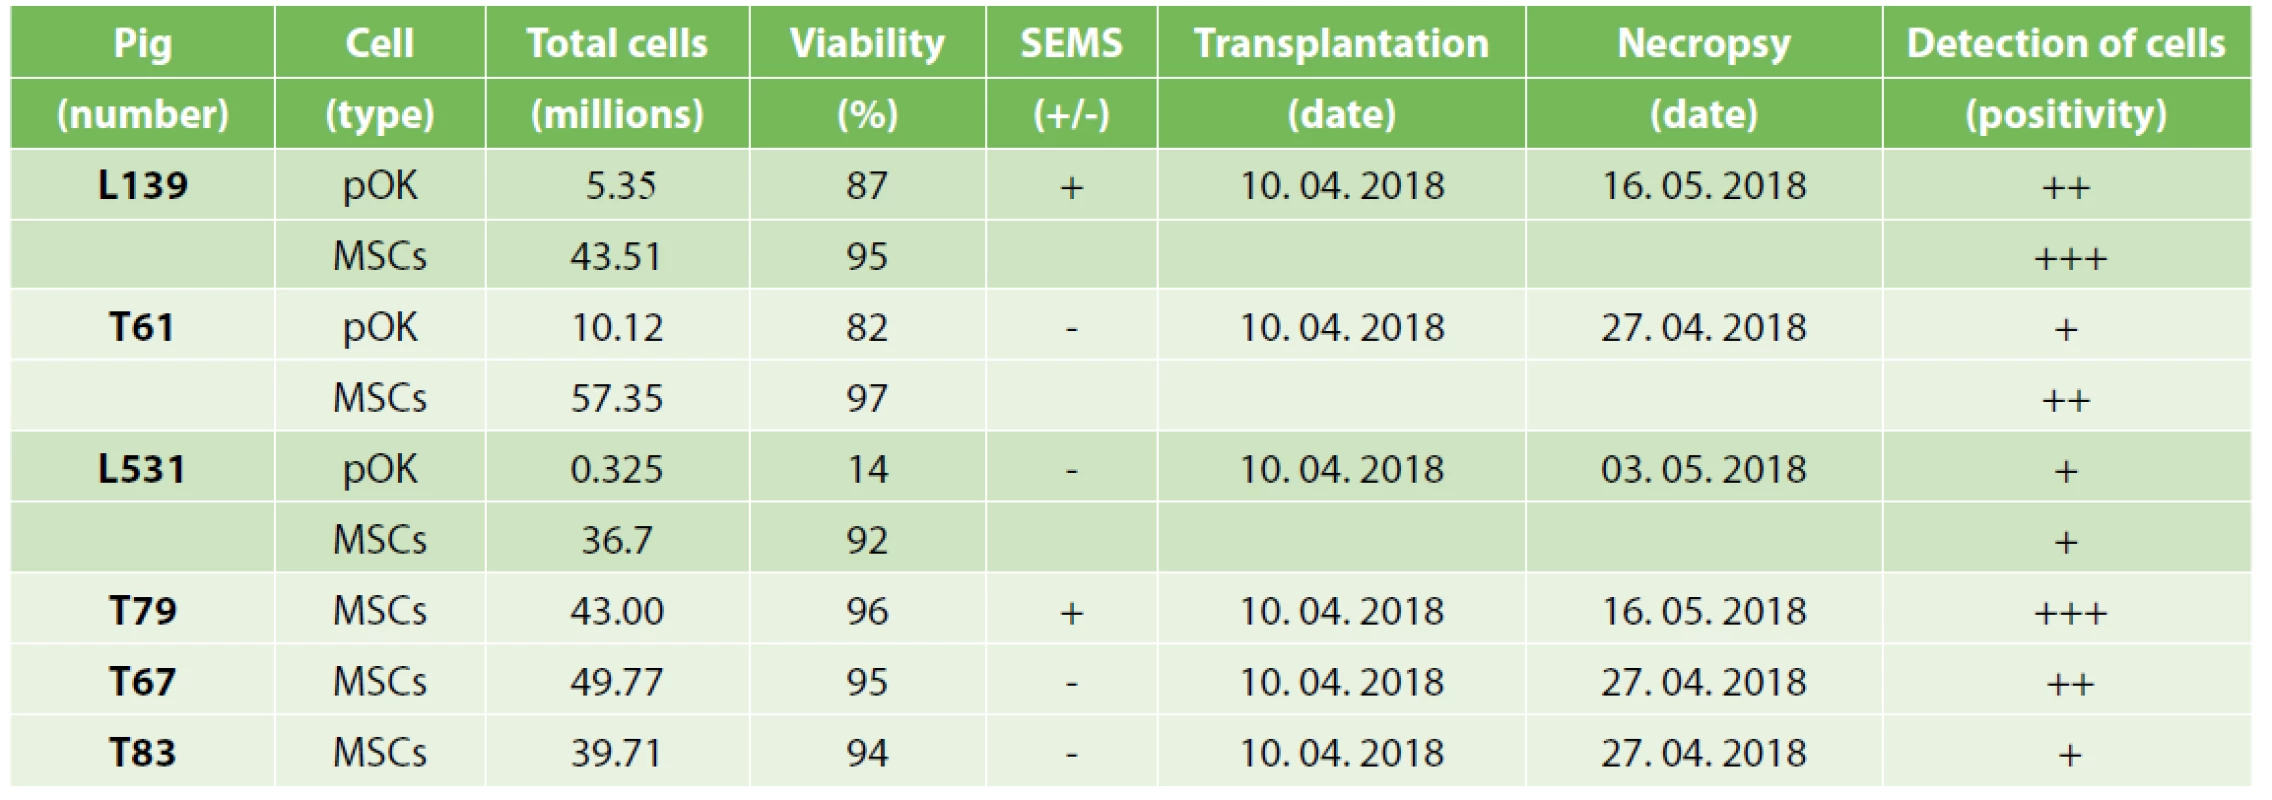 Total cell numbers and viabilities of MSCs or pOKs in experimental animals, SEMS presence, and the date of transplantation
and necropsy with final positivity detection of tracked cells in ESD sites tissue